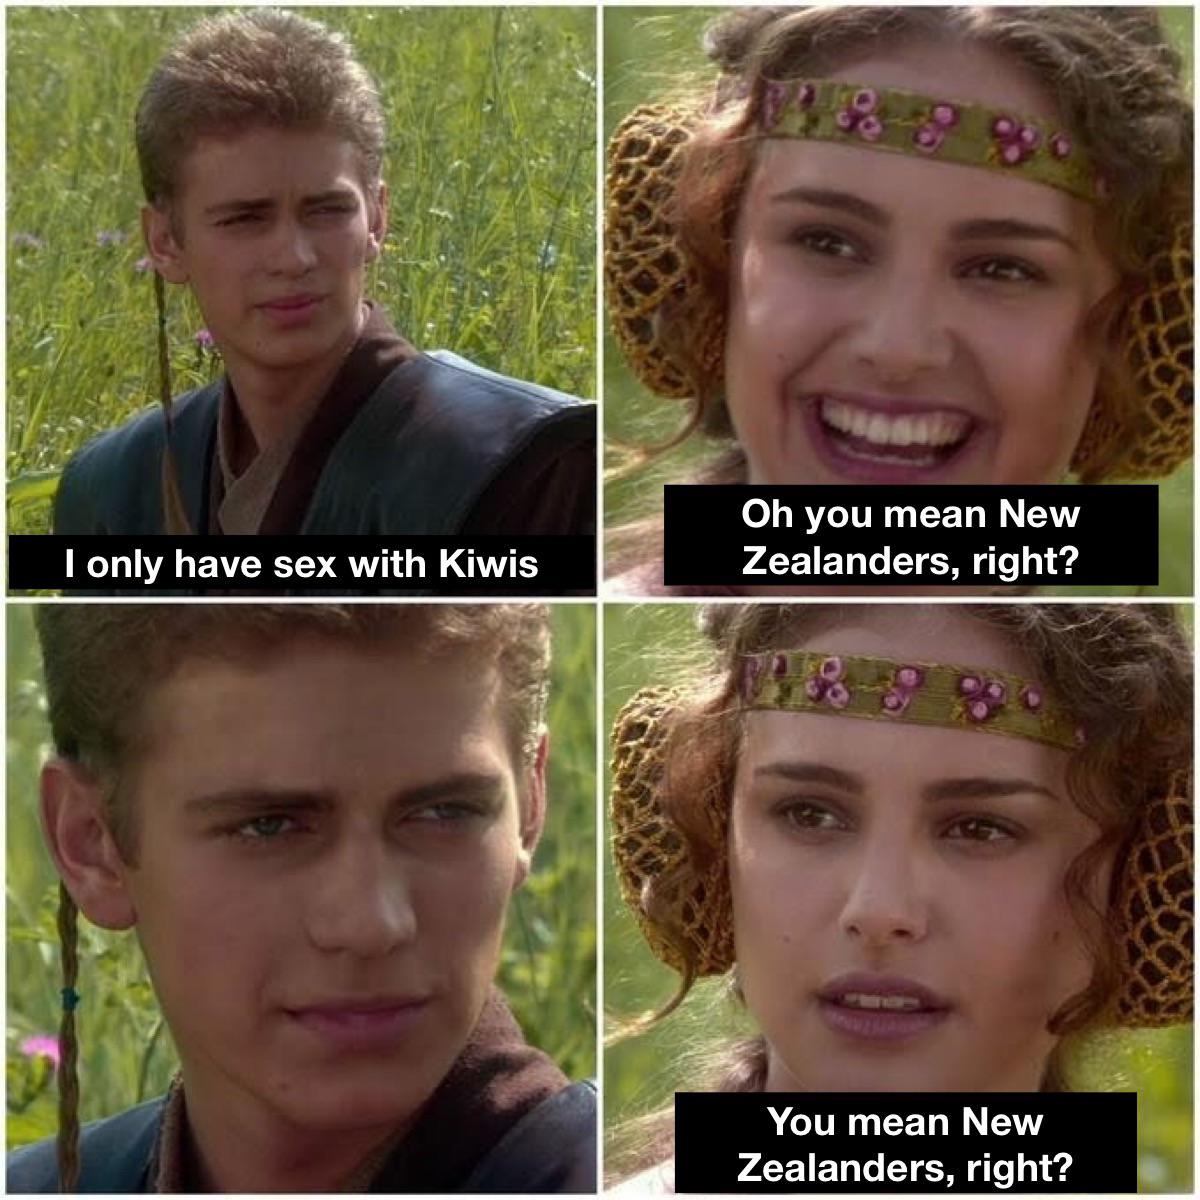 funny memes - dank memes - better world anakin padme meme template - 8 Oh you mean New Zealanders, right? I only have sex with Kiwis You mean New Zealanders, right?